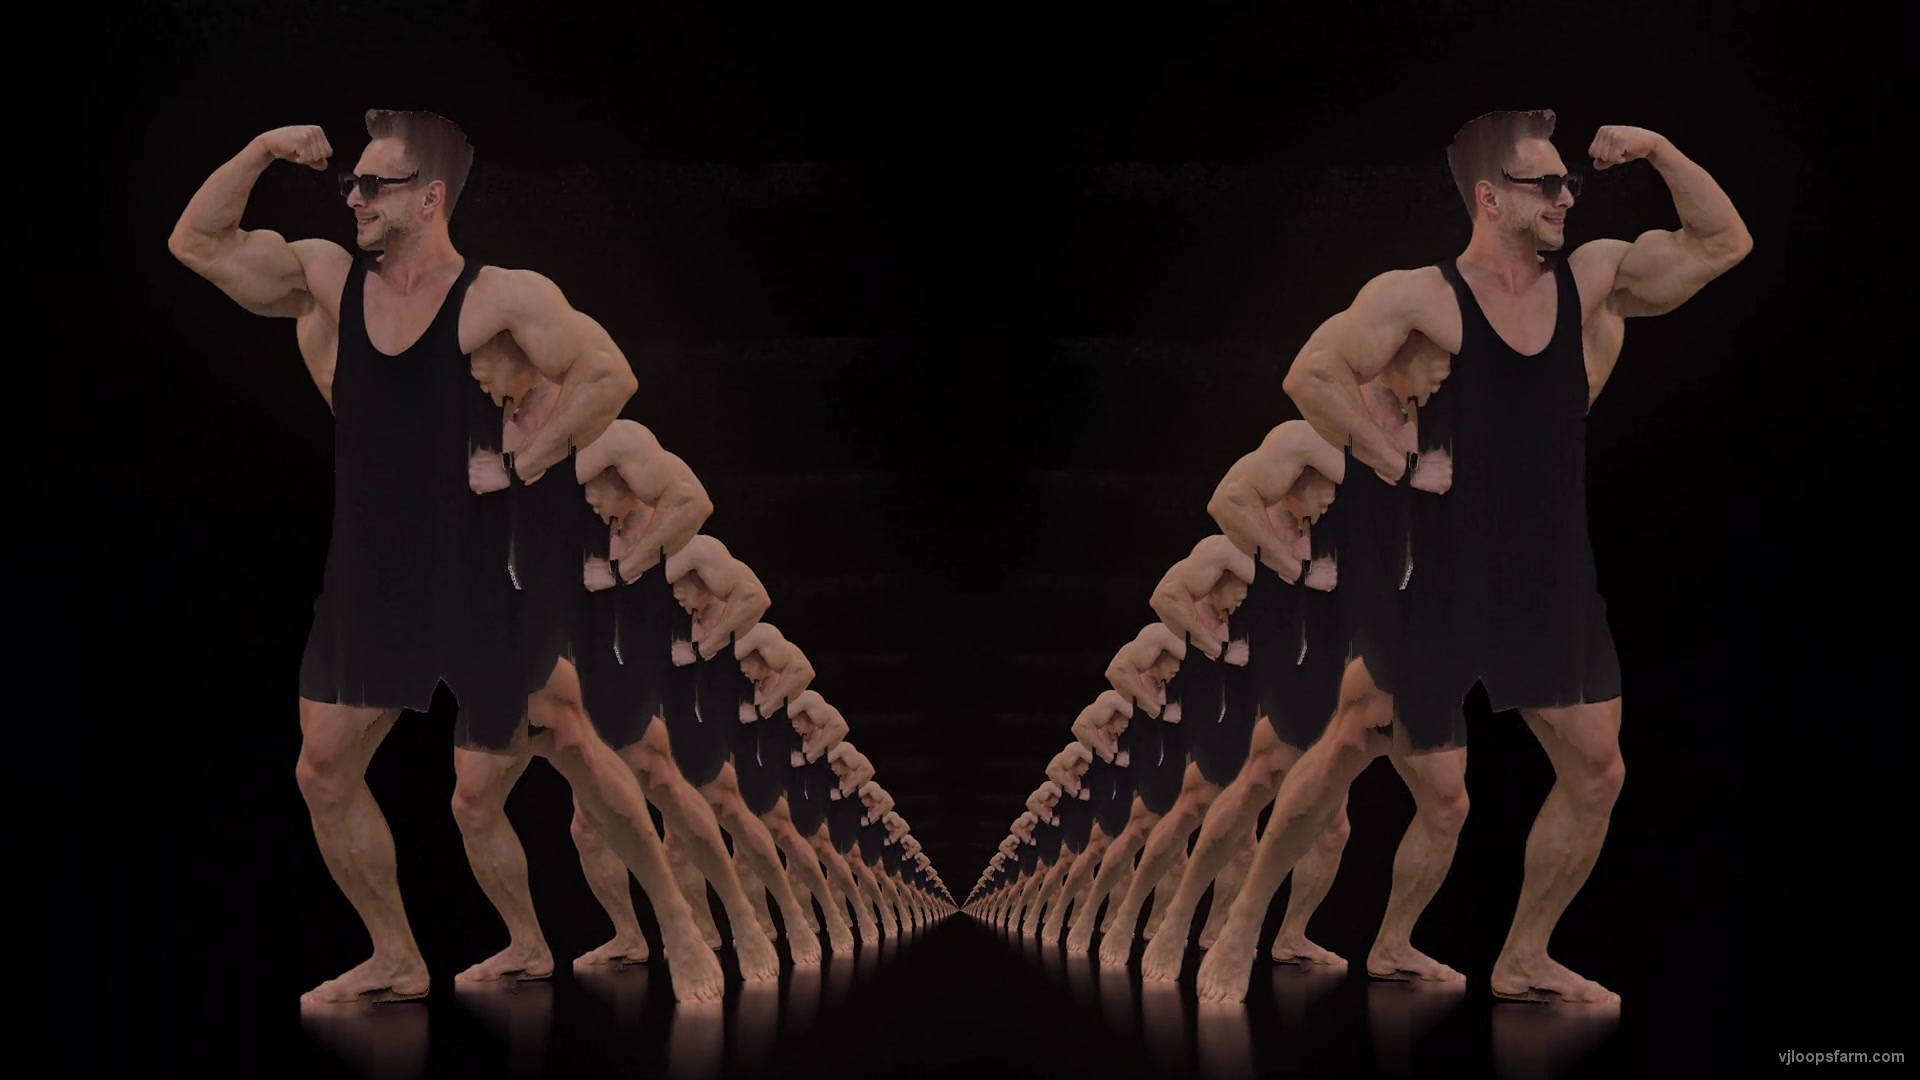 Bodybuilder-Duo-pixel-sorted-in-tunnel-isolated-on-Alpha-Channel-Video-VJ-Footage-or7n8o-1920_007 VJ Loops Farm